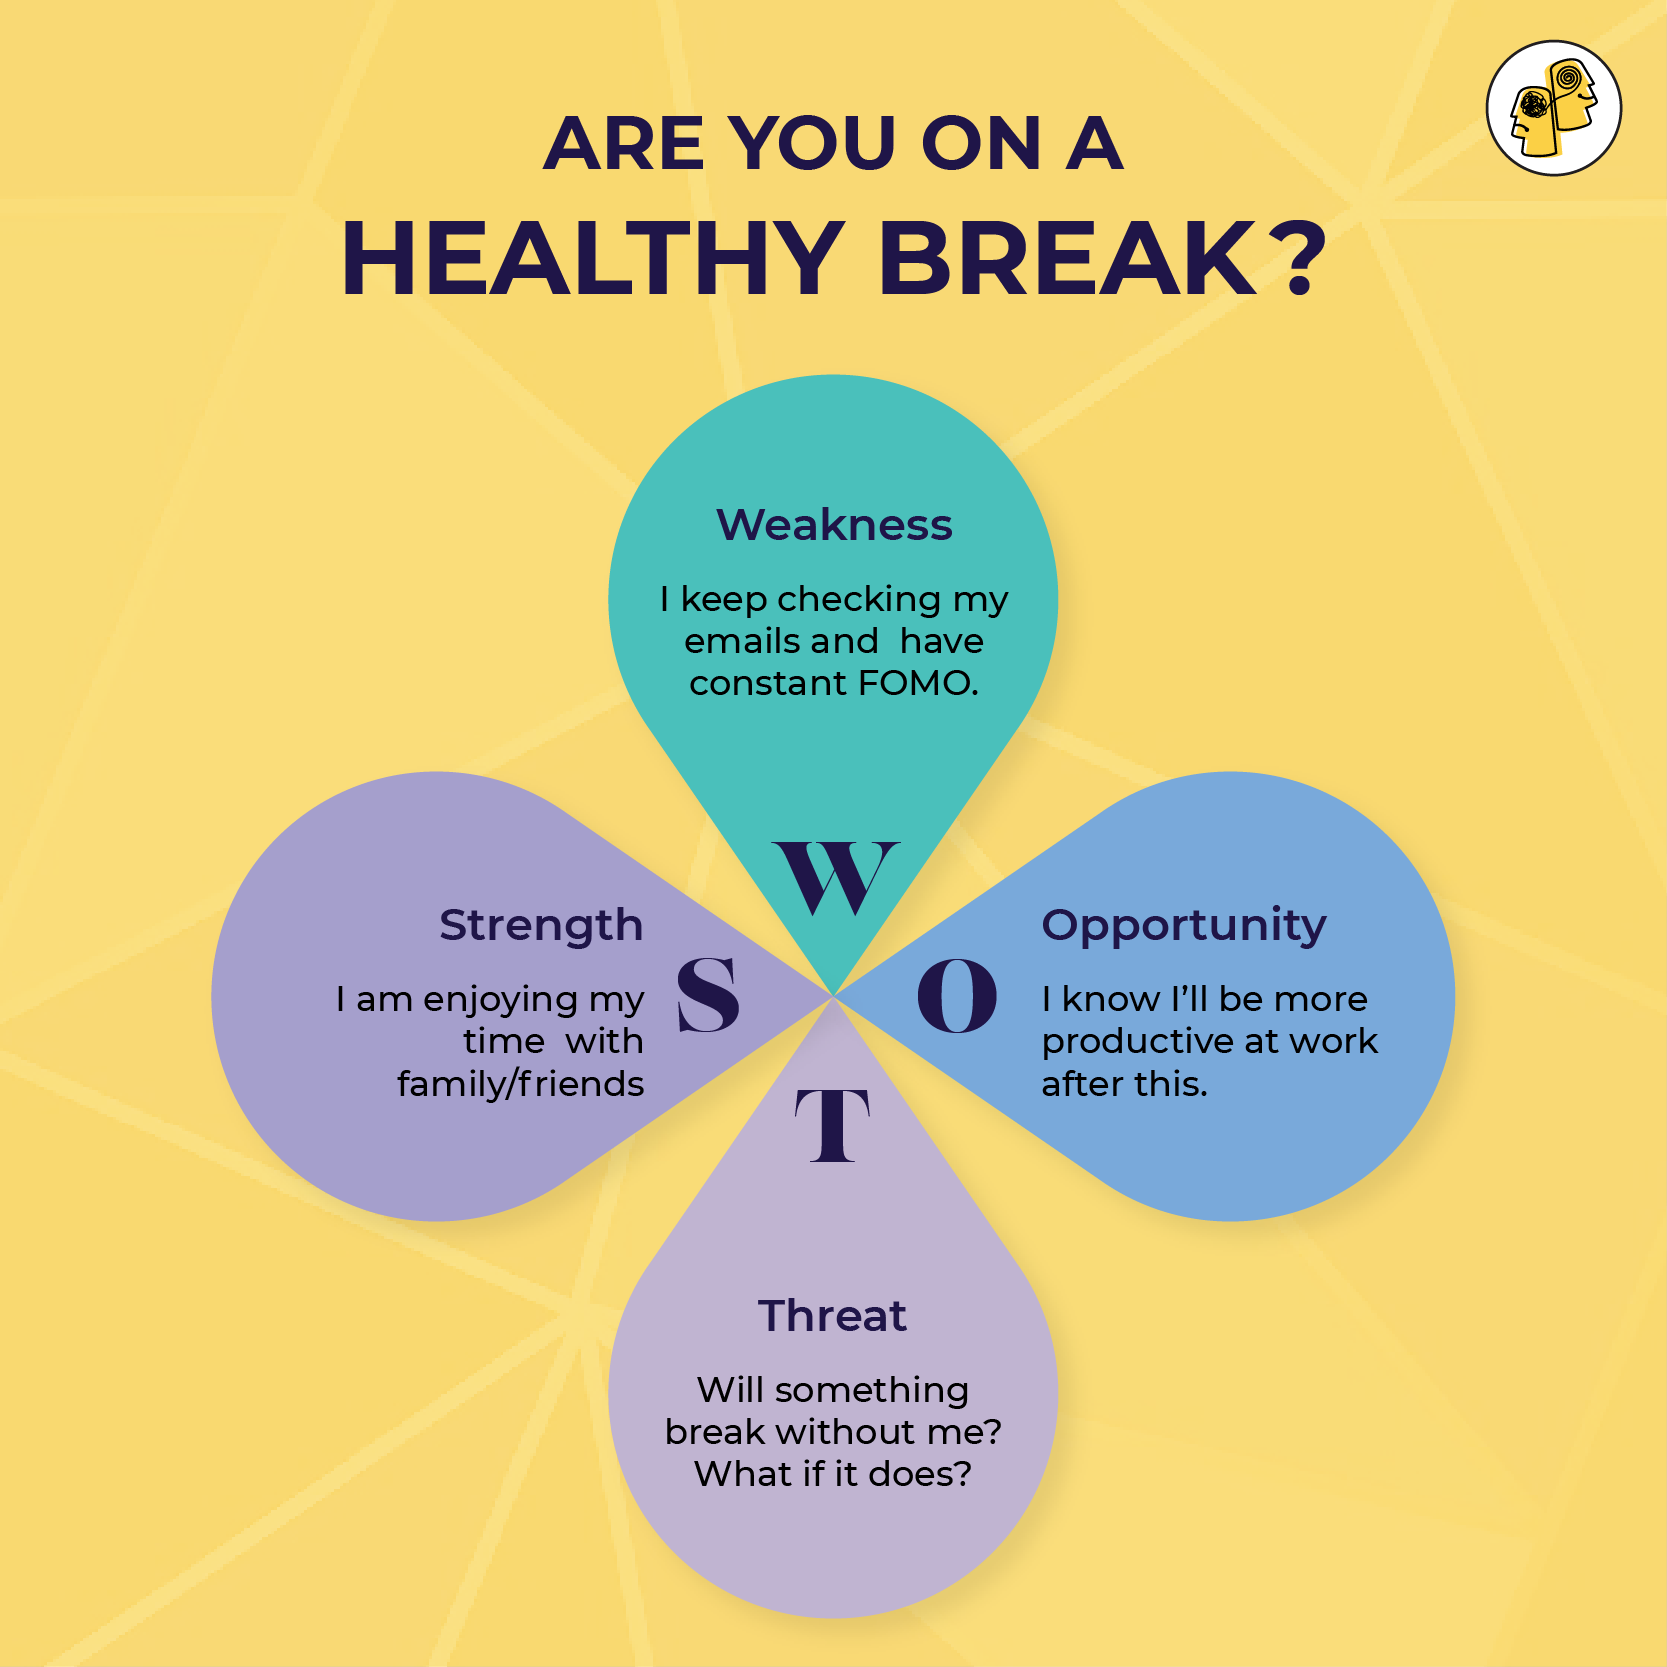 Are you on a healthy break